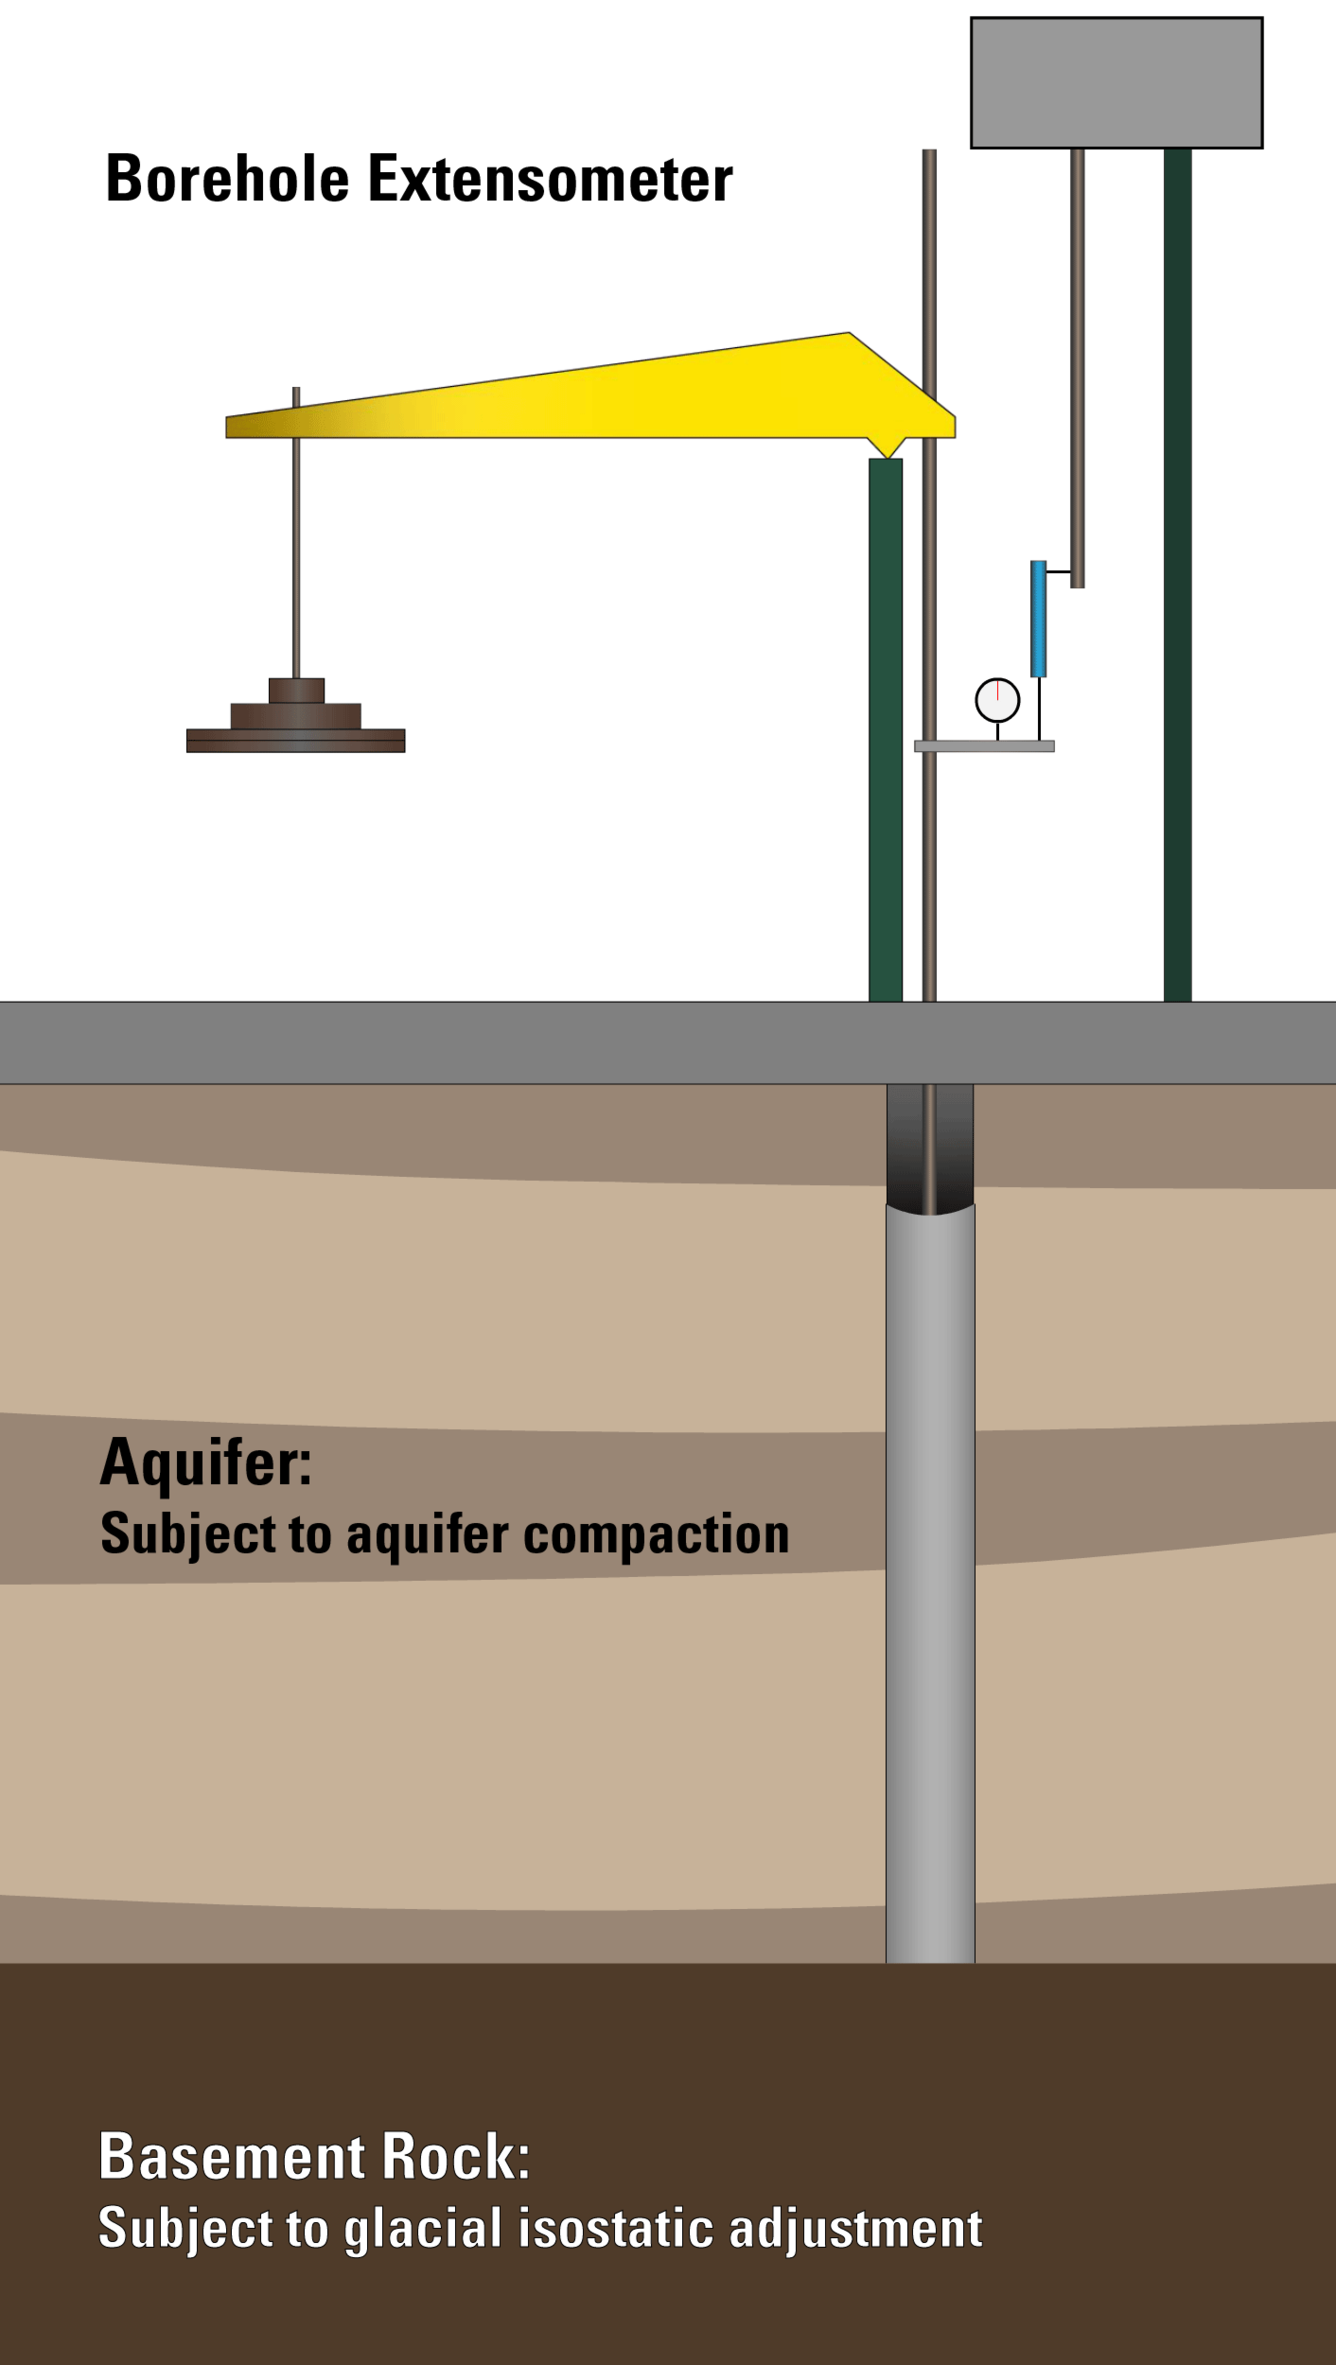 A borehole extensometer. A pipe extends through an aquifer (subject to compaction) down to bedrock (subject to isostacy).